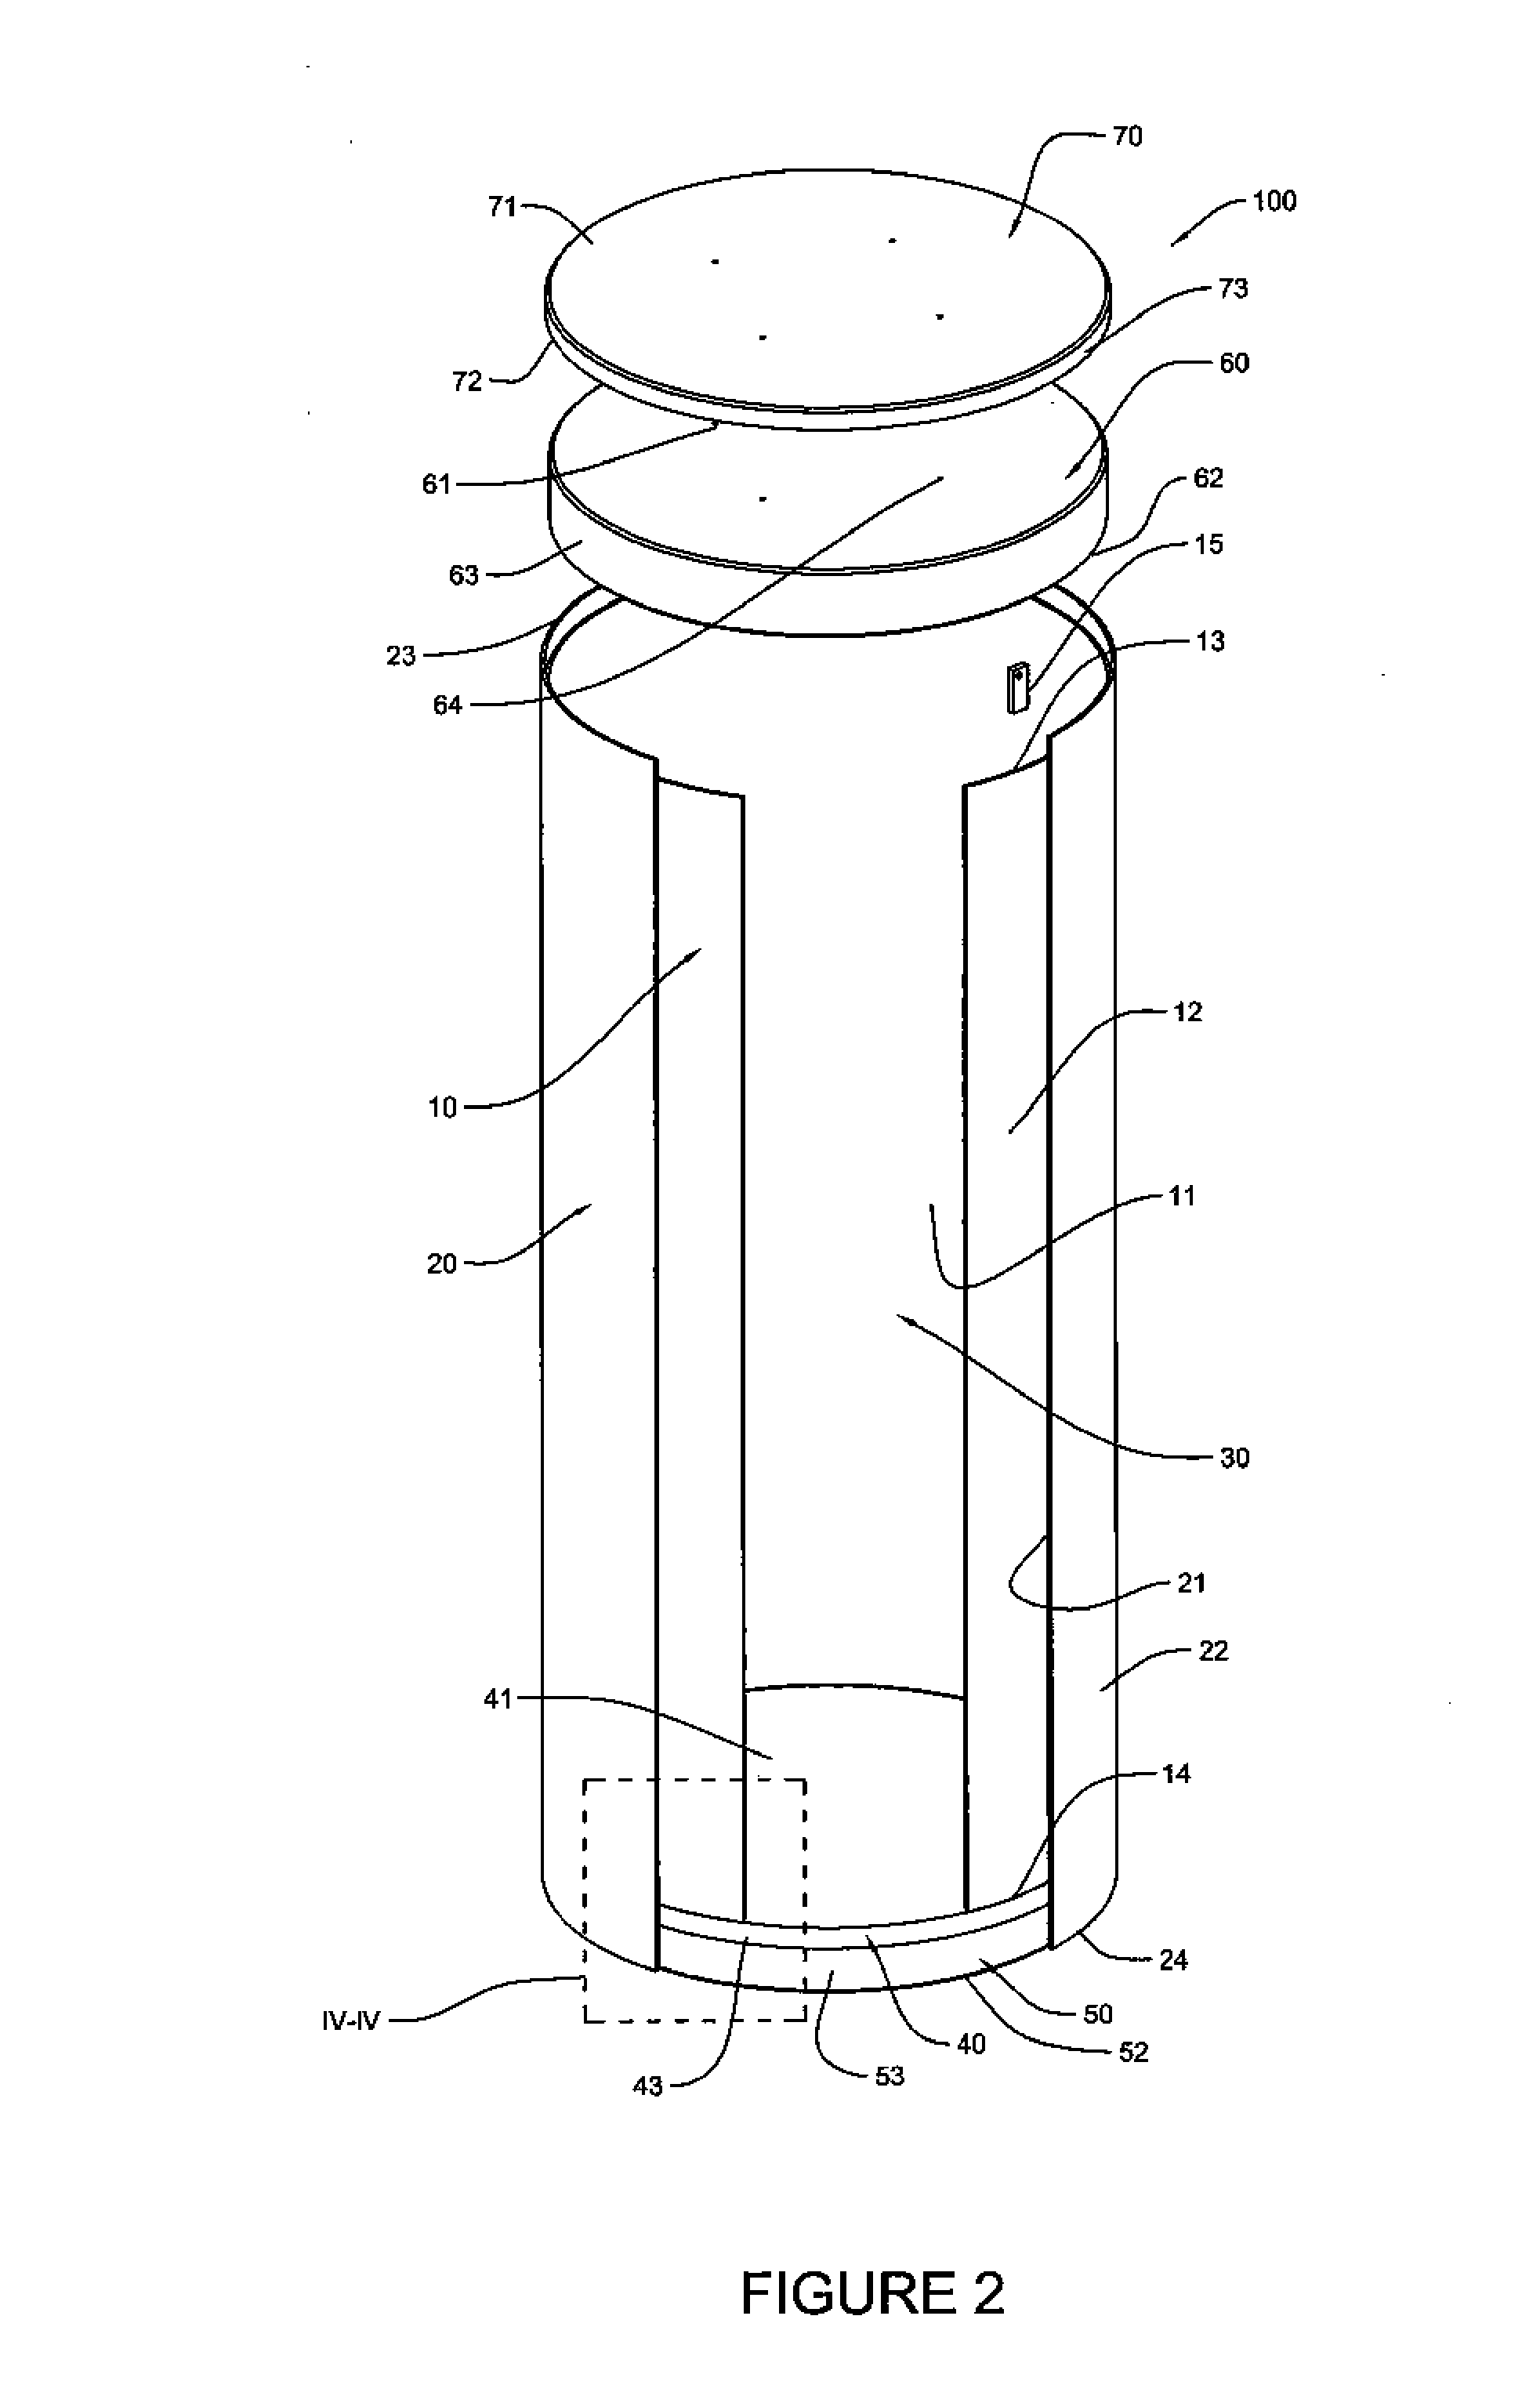 Canister apparatus and basket for transporting, storing and/or supporting spent nuclear fuel